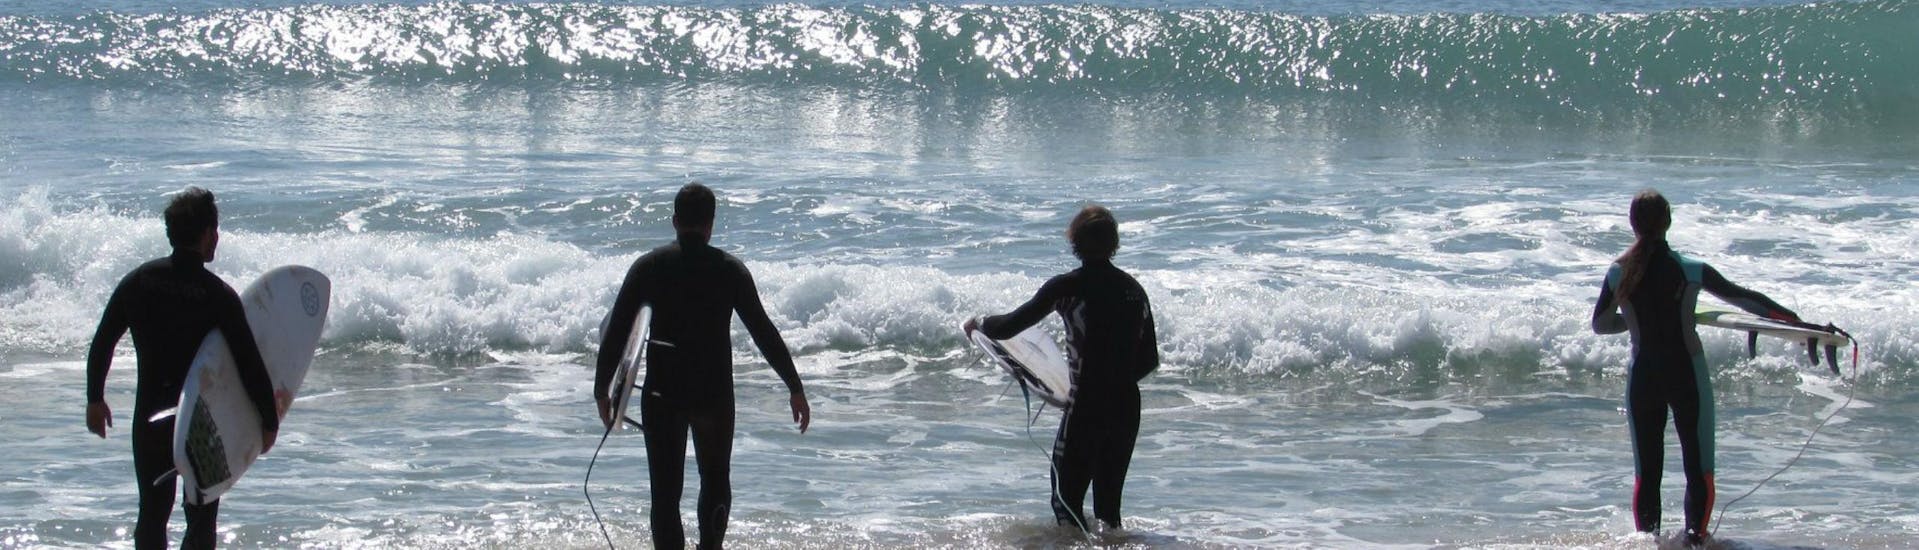 Surfing Lessons for Kids &amp; Adults - All Levels - Winter with Zambeachouse Lourinhã - Hero image